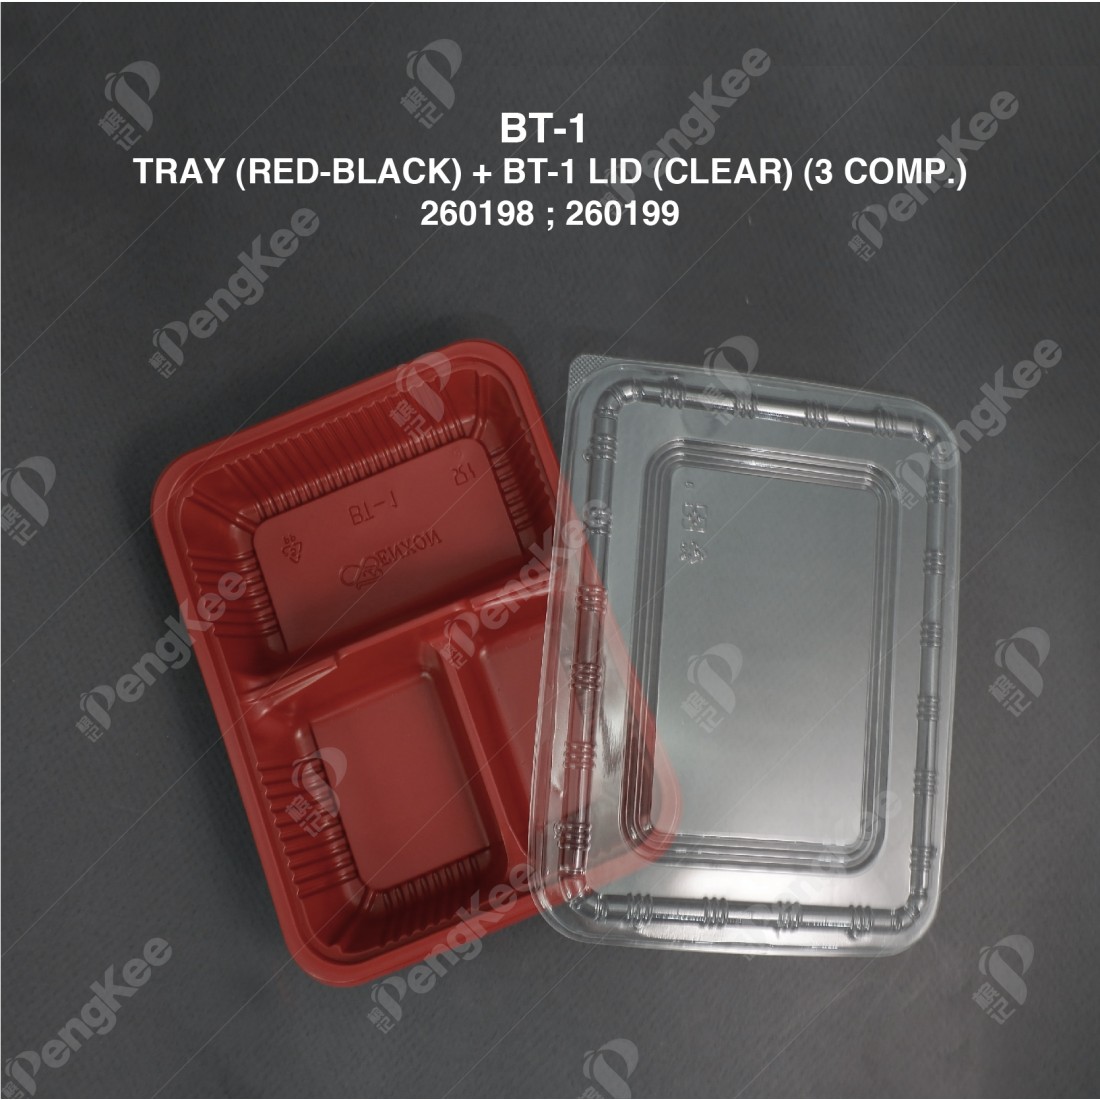 BT-1 LID (CLEAR) + TRAY (RED + BLACK) (3 COMP.)